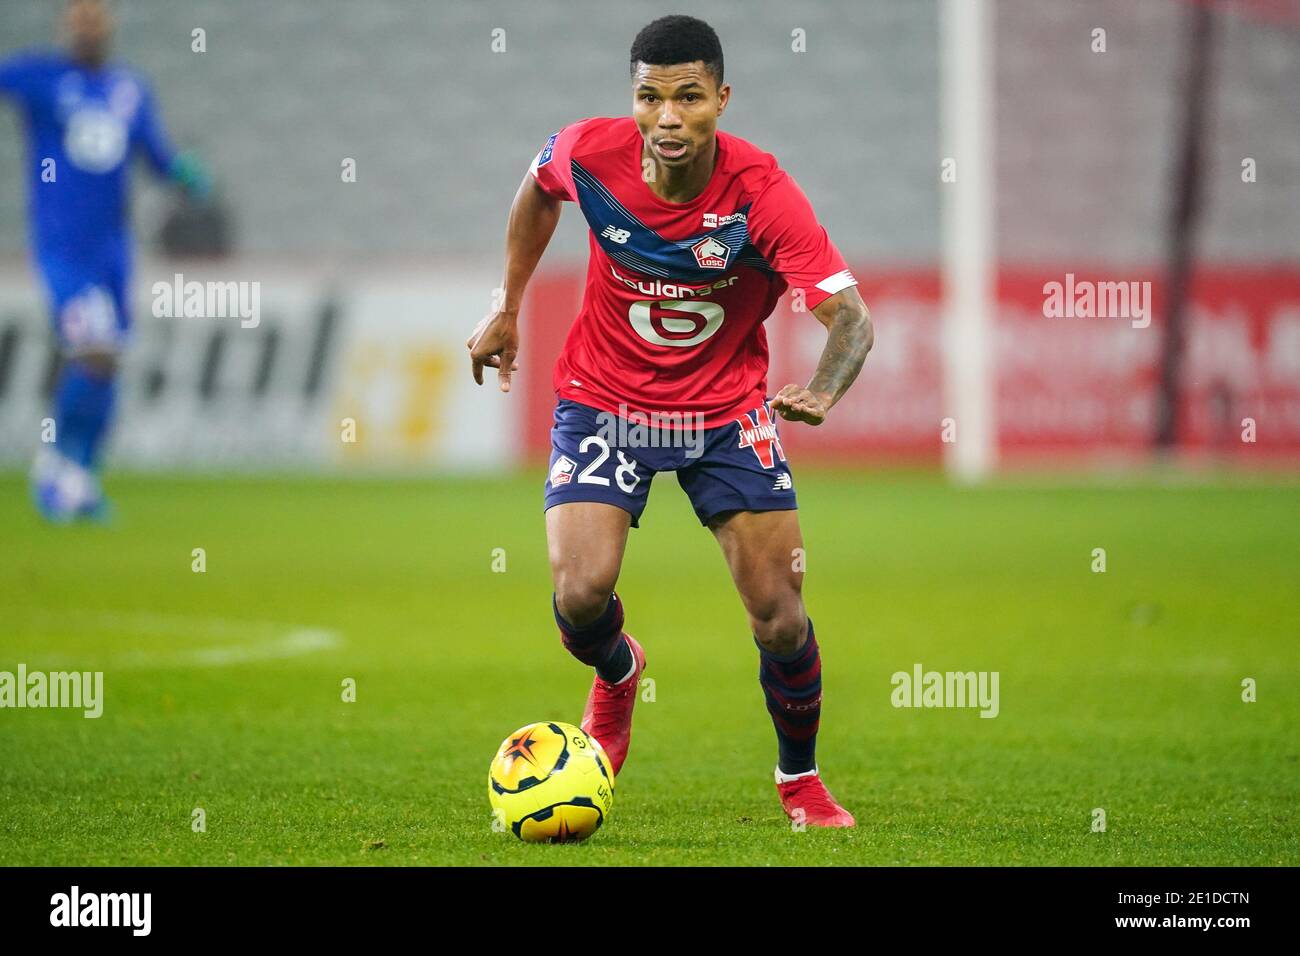 LILLE, FRANCE - JANUARY 6: Reinildo of Lille OSC during the Ligue 1 match between Lille OSC and Angers SCO at Stade Pierre Mauroy on January 6, 2021 in Lille, France (Photo by Jeroen Meuwsen/BSR Agency/Alamy Live News)*** Local Caption *** Reinildo Stock Photo